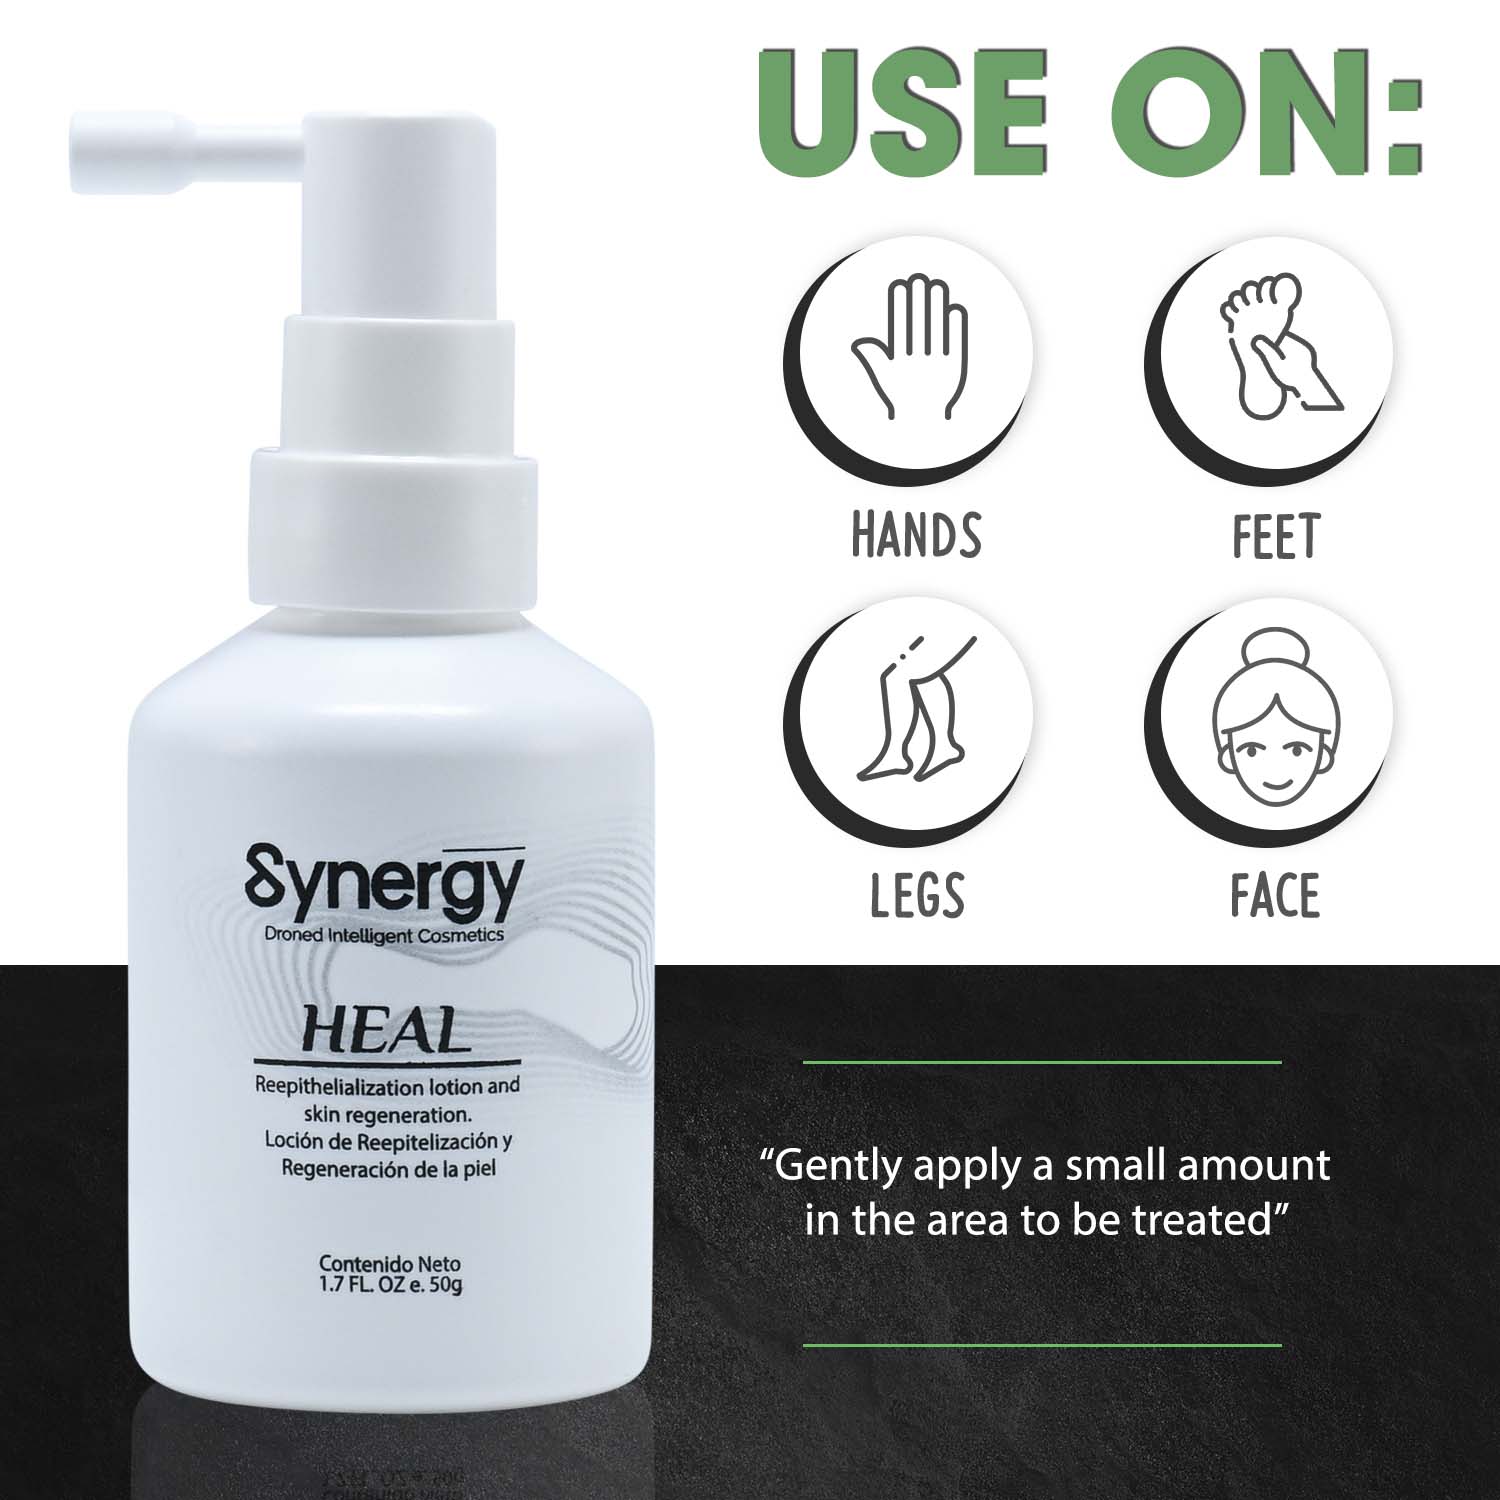 Synergy Heal for skin care, scars and stretch marks.